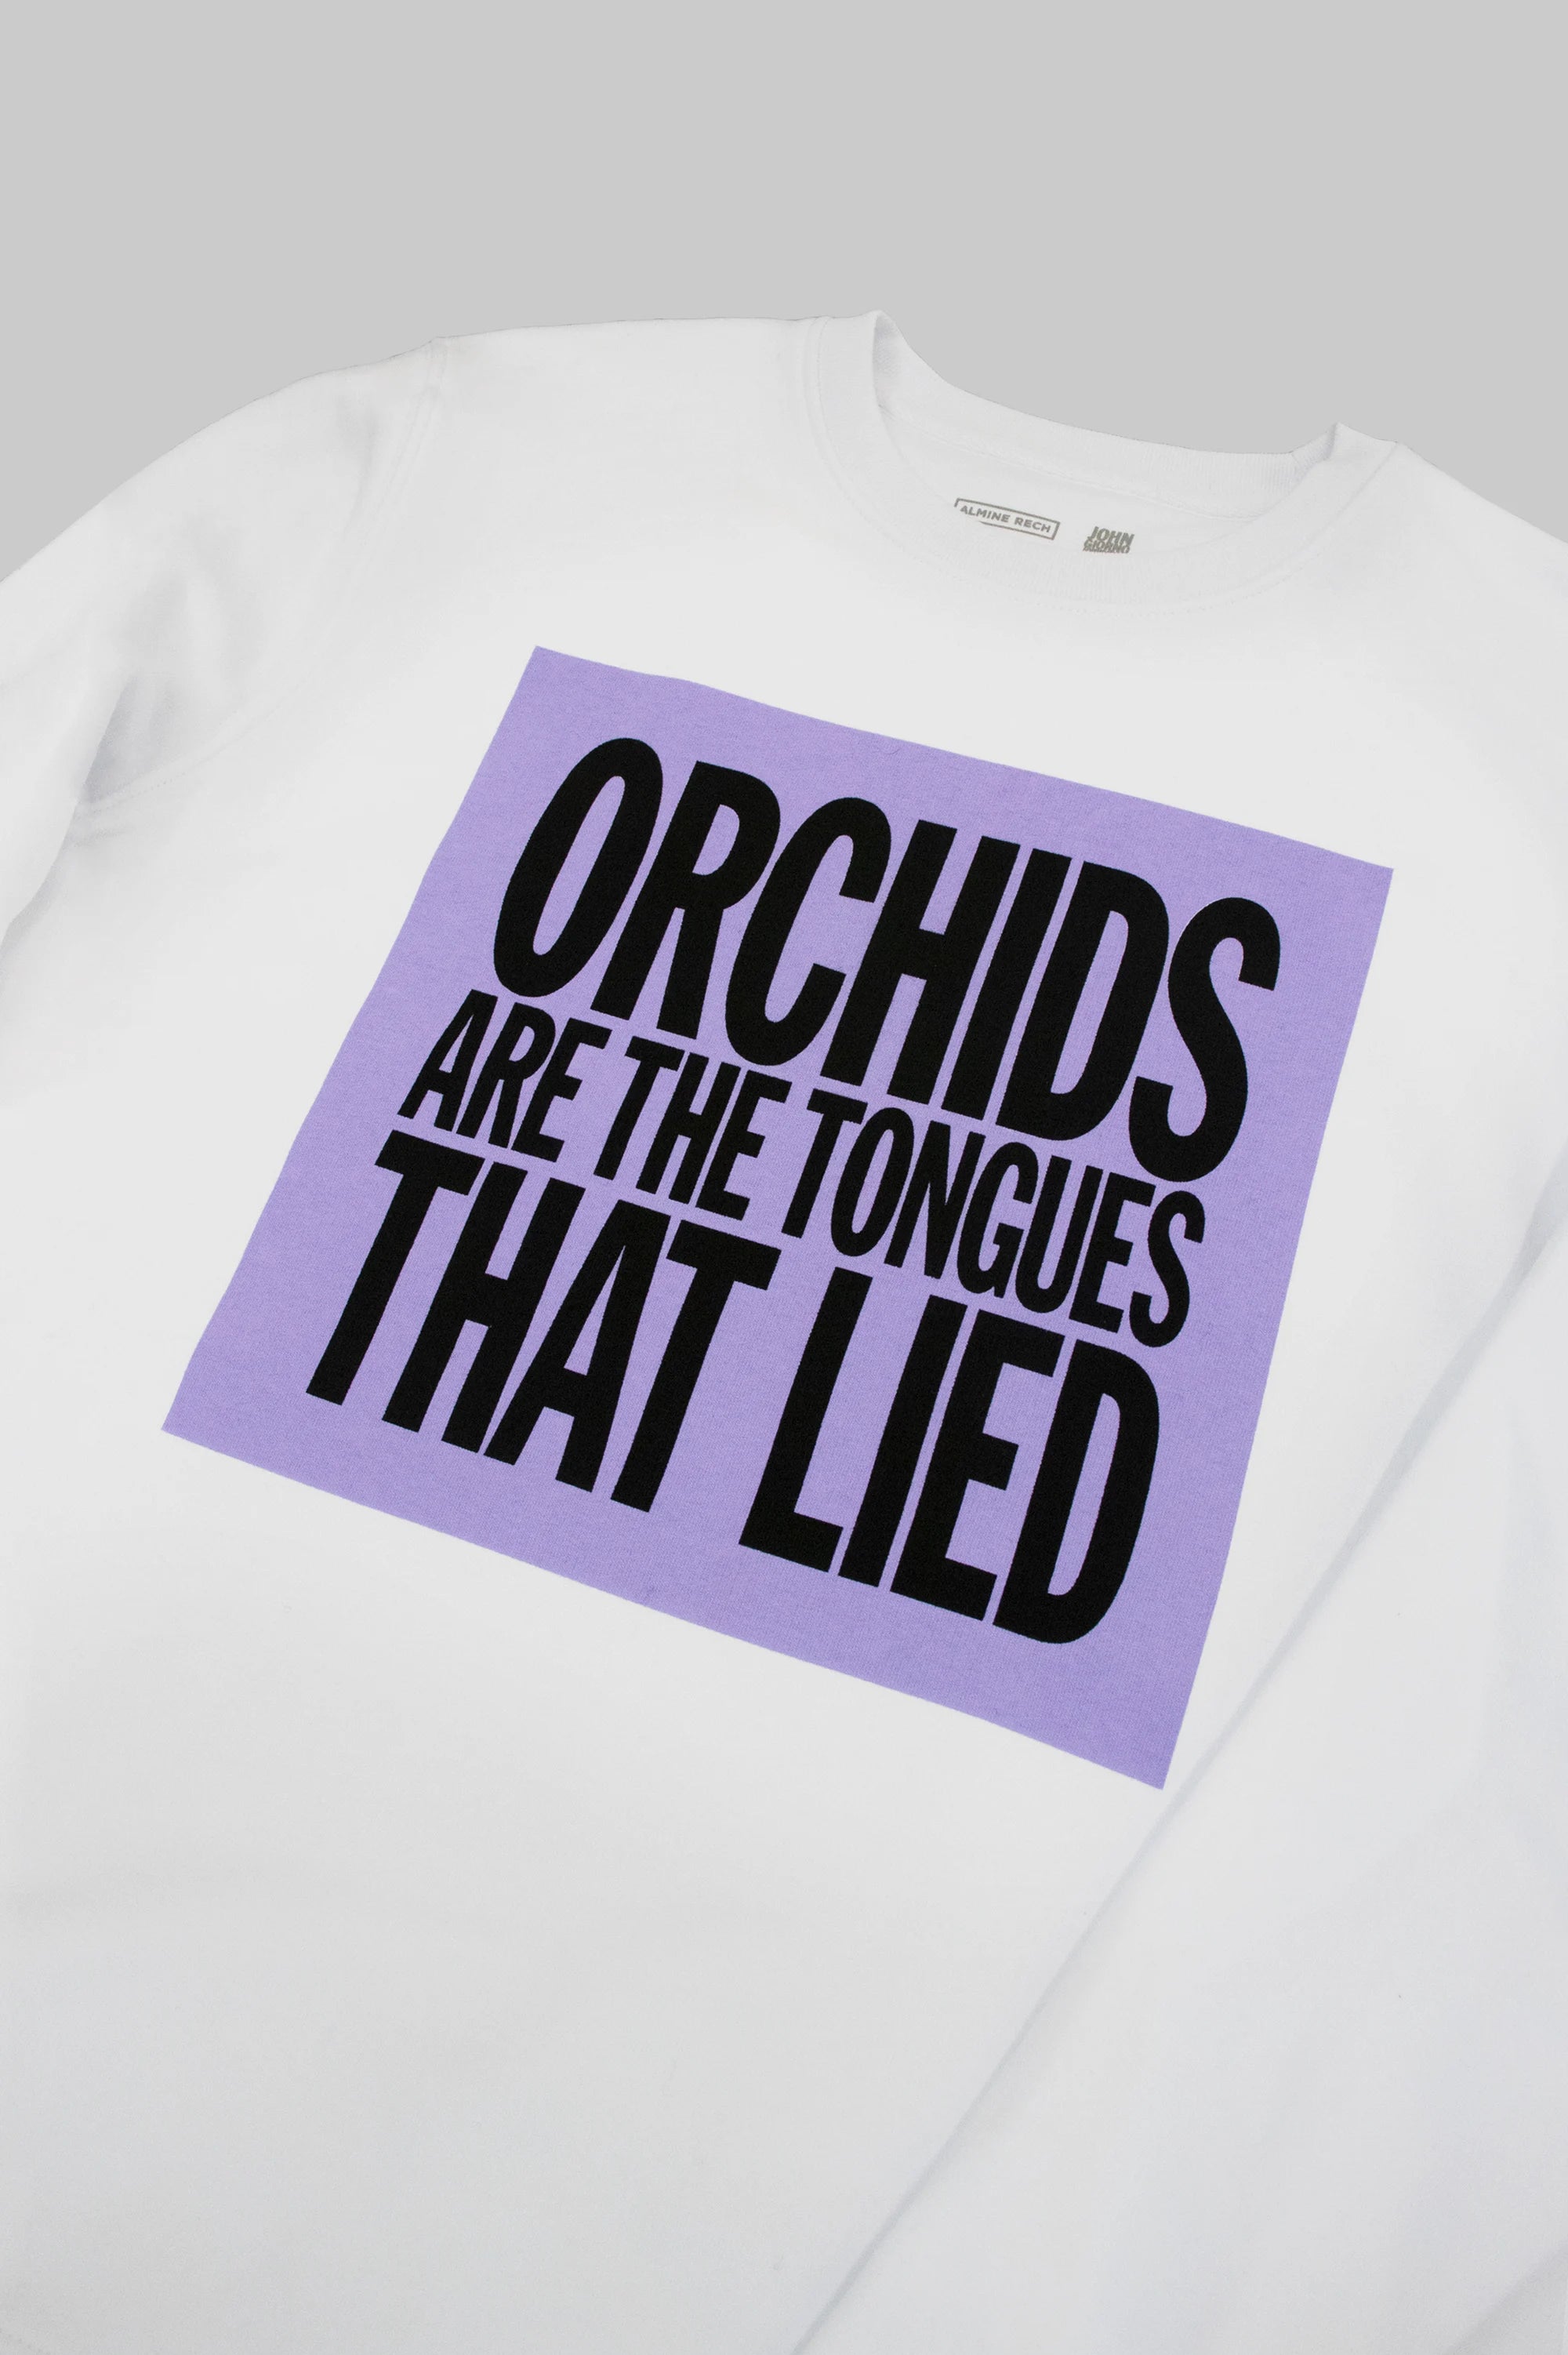 Orchids are the Tongues that Lied - Sweatshirt